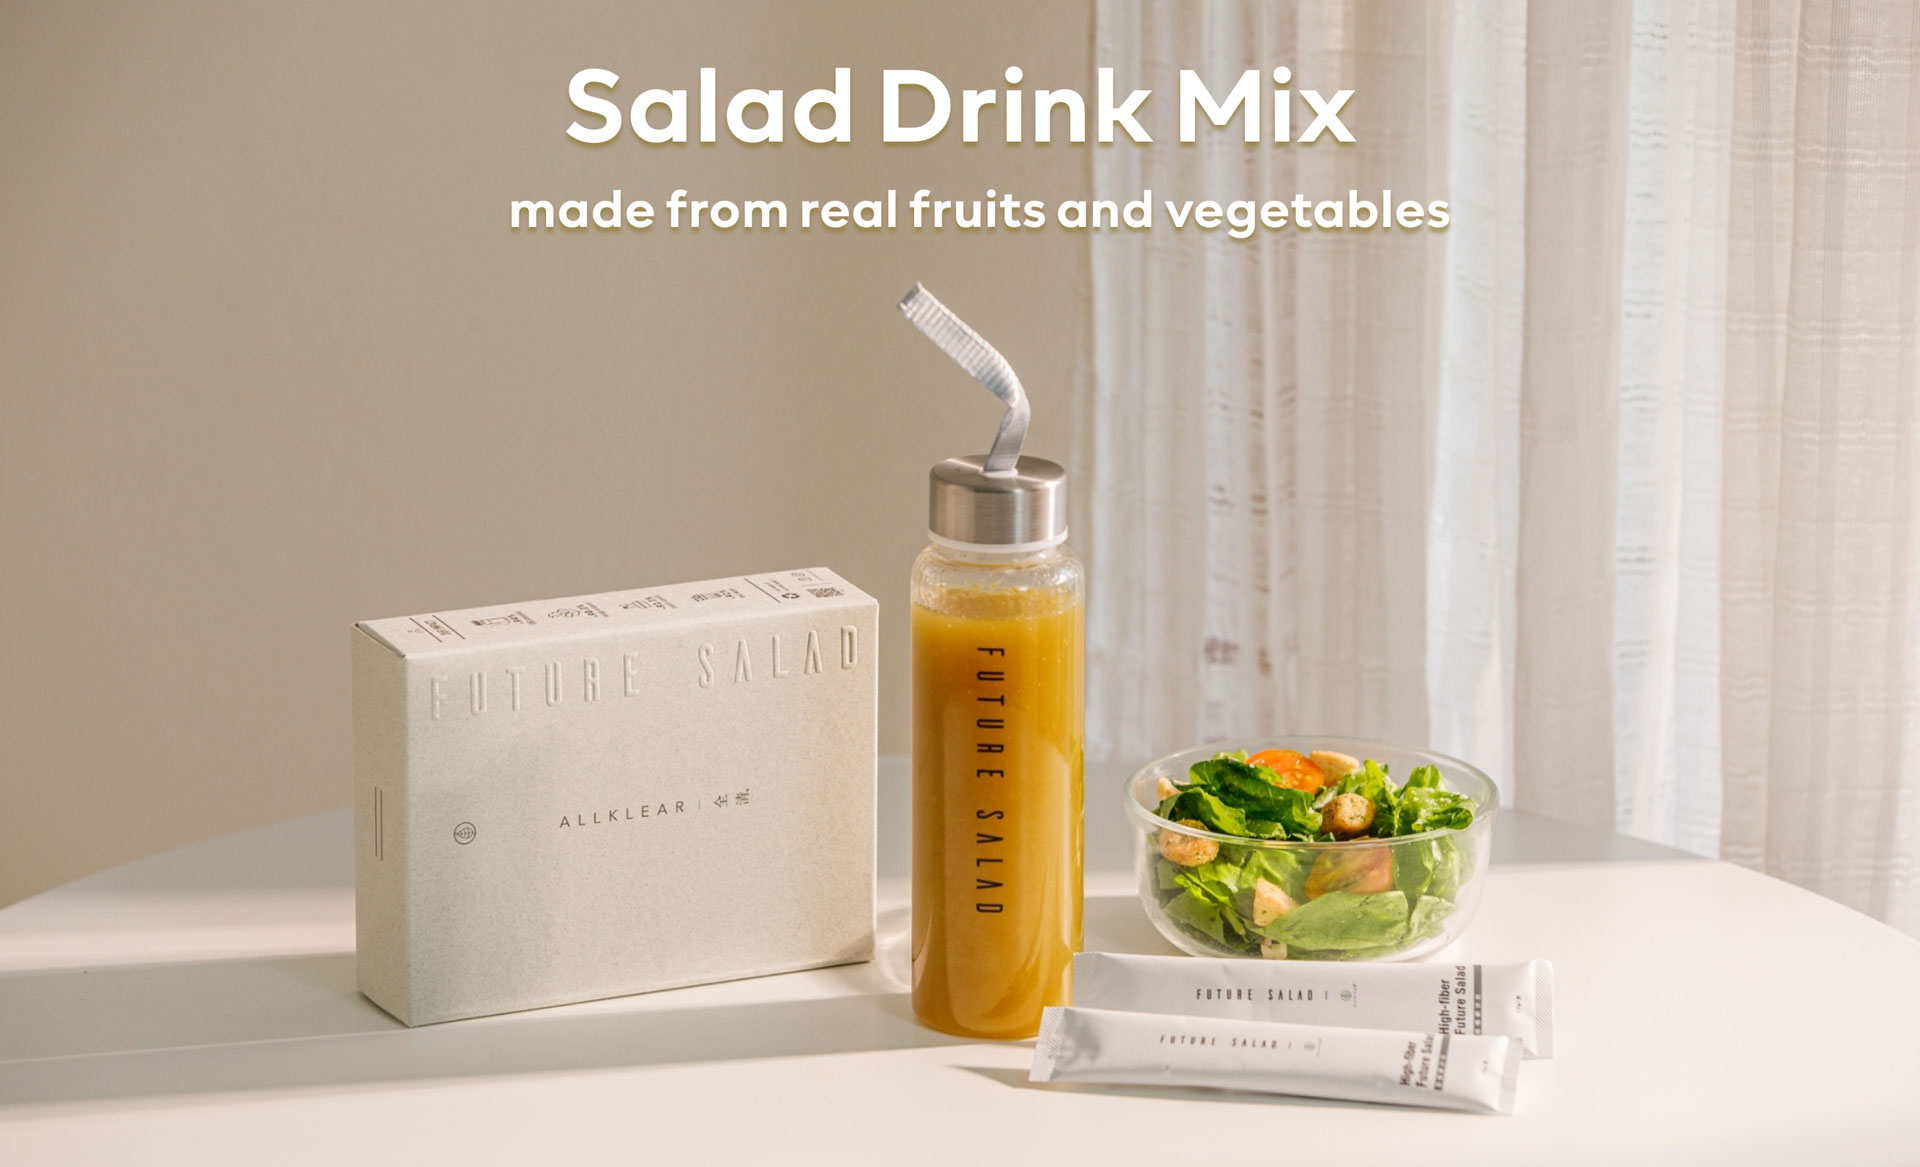 Salad Drink Mix made from real fruits and vegetables